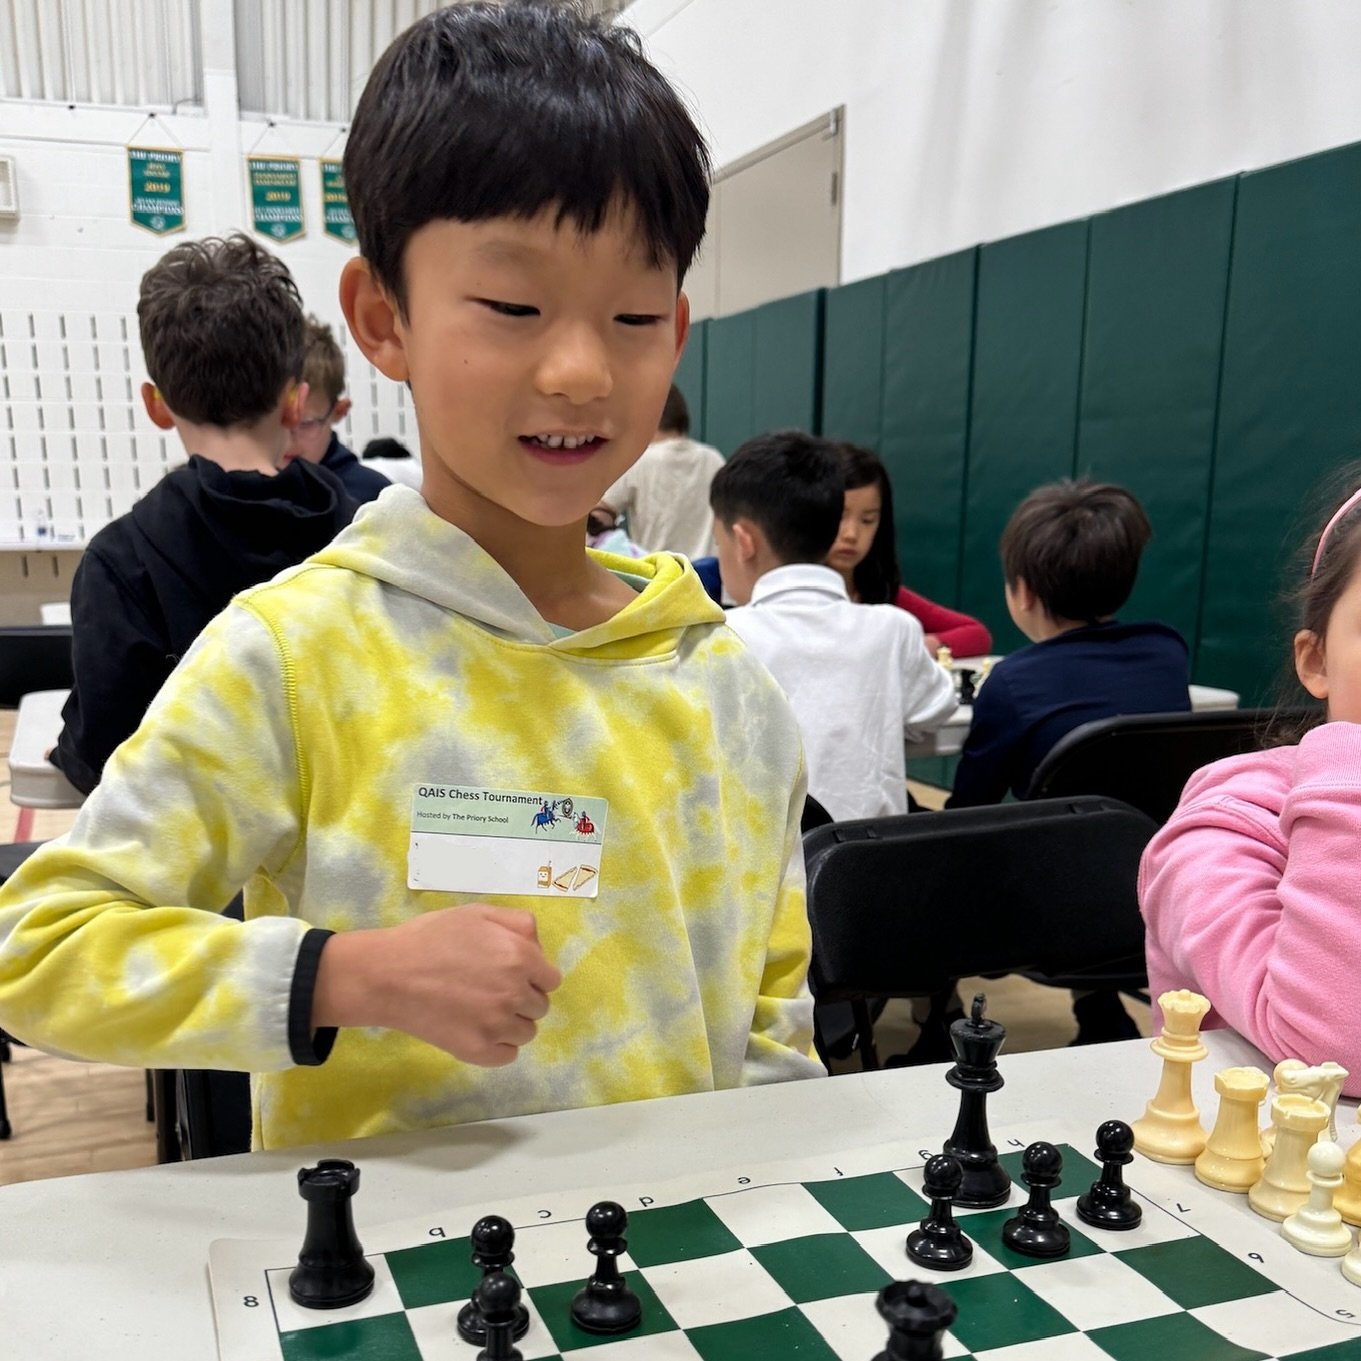 Concentration and calculation were on display on Saturday as 87 students from several QAIS schools competed in a chess battle during The Priory&rsquo;s 26th annual Chess Tournament. Sixteen students represented The Priory admirably, and we are very p